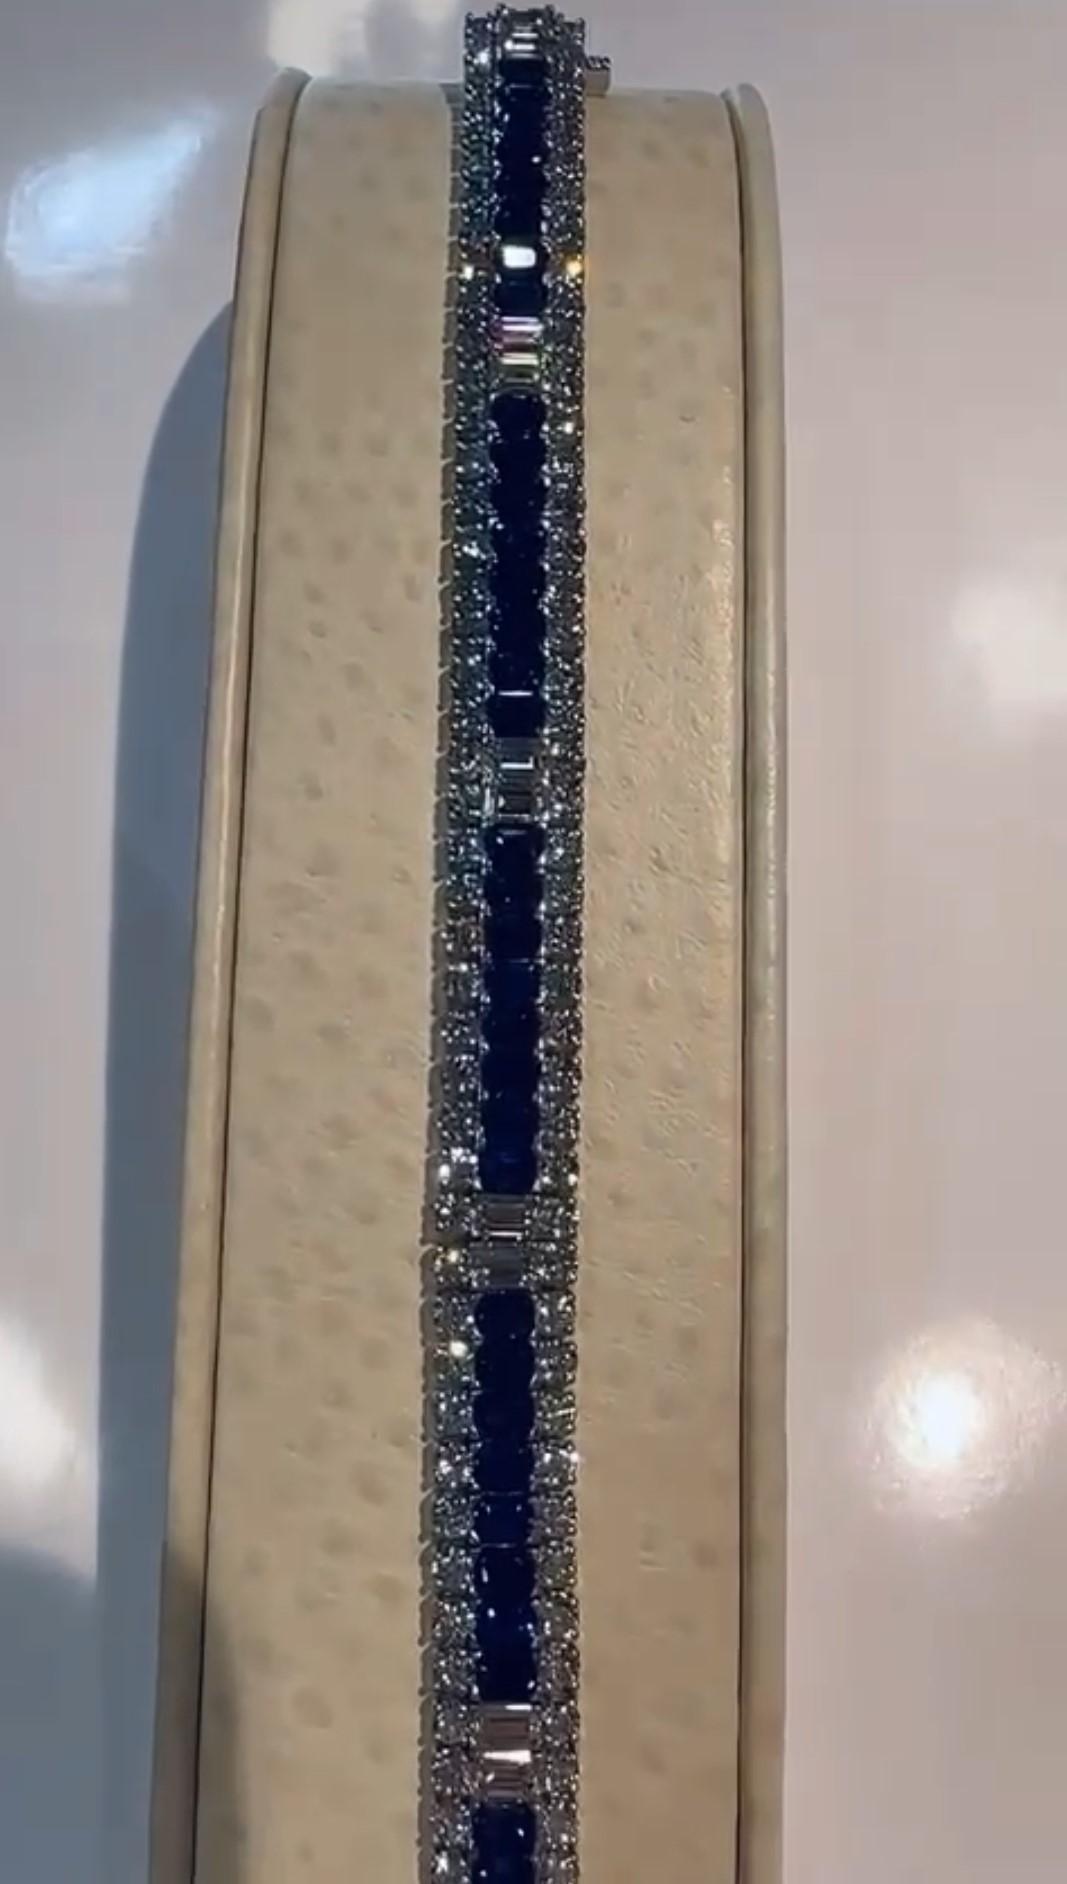 The Following Item we are offering is a Rare Important Radiant Platinum Large Rare Fancy Blue Ceylon Sapphire and Diamond Bracelet. Bracelet is comprised of a Rare Large Gorgeous Emerald Cut Blue Ceylon Sapphires adorned with Magnificent Emerald Cut